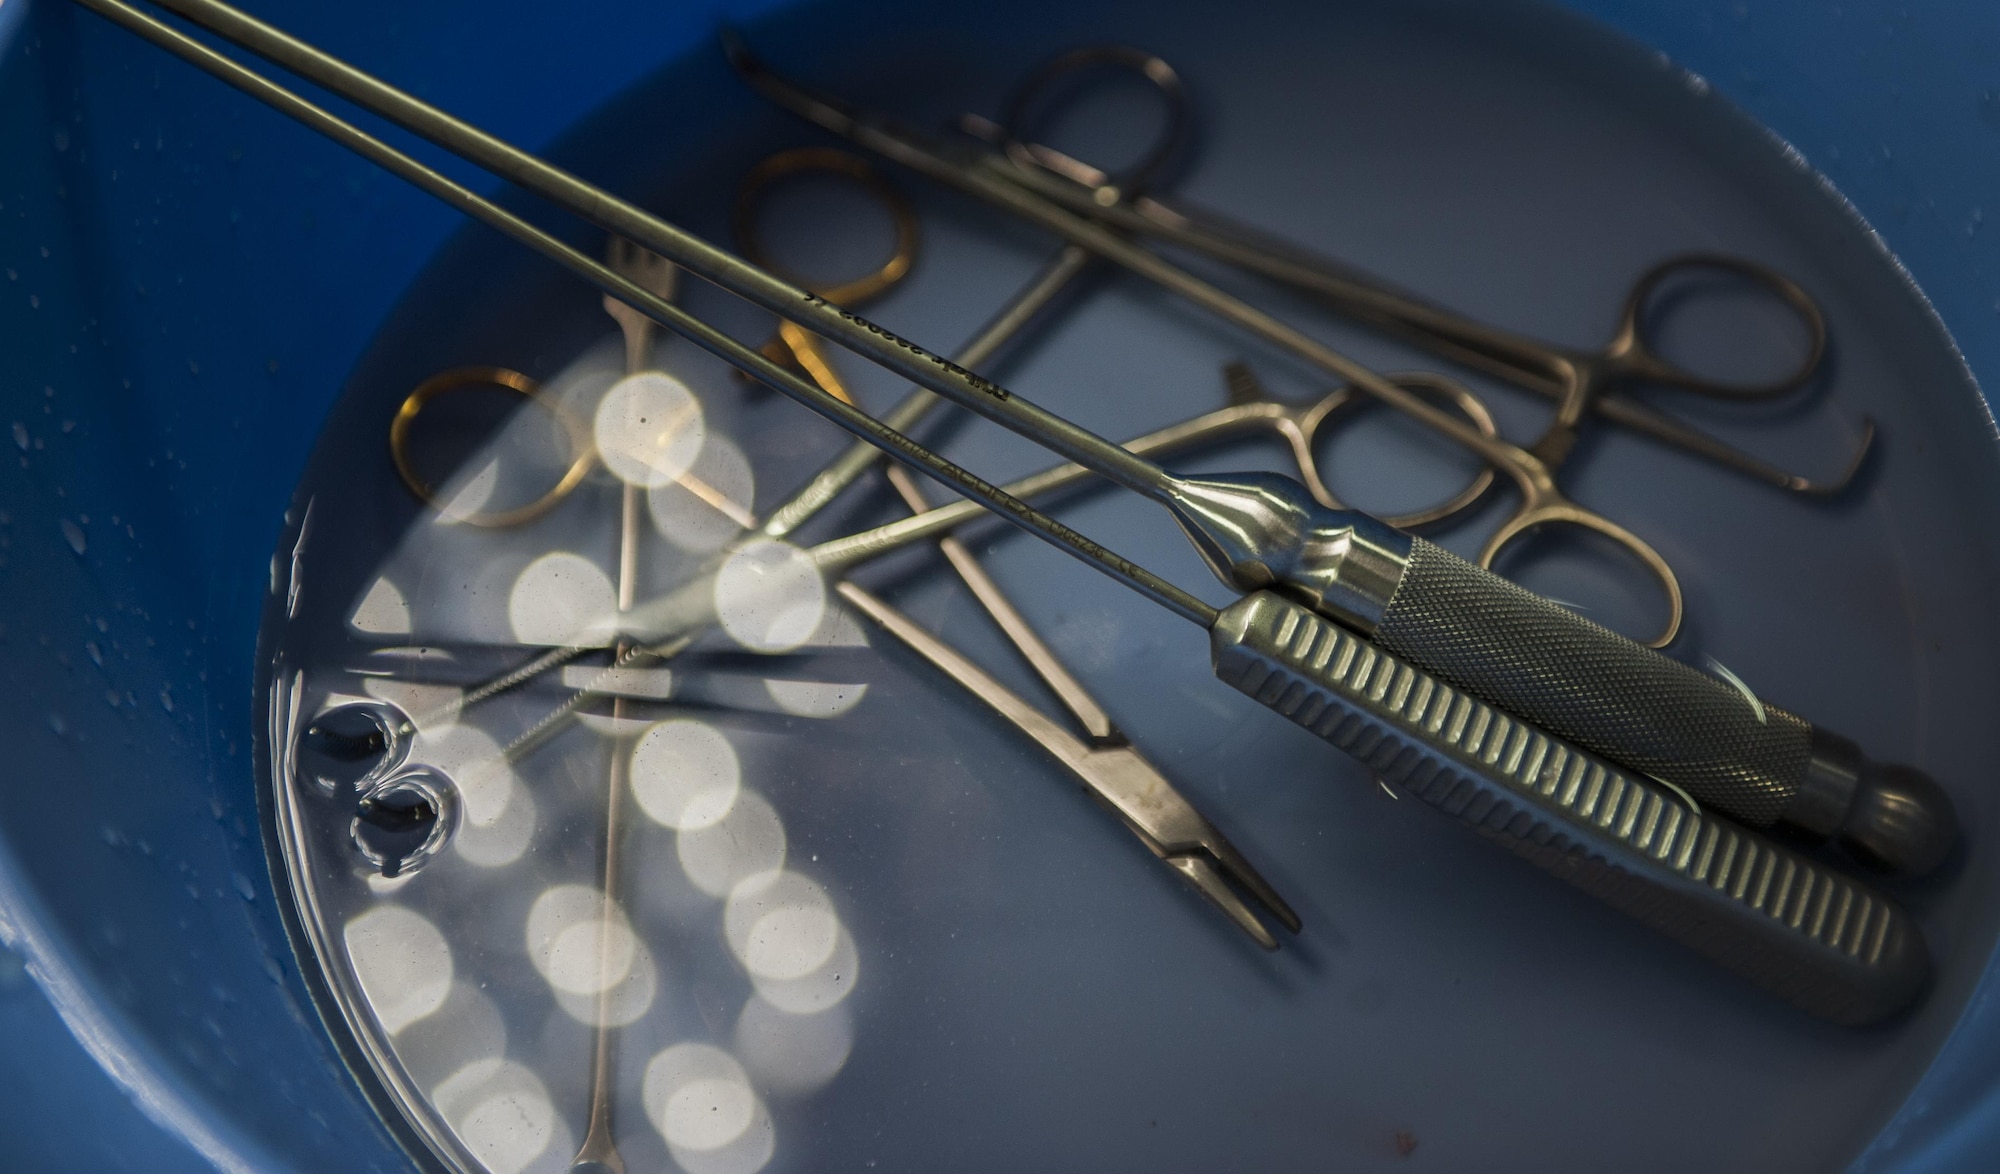 Sterilized surgical instruments sit in a bowl during an ACL surgery at the Mike O’Callaghan Federal Medical Center on Nellis Air Force Base, Nev., Oct. 17, 2016. With surgeons, nurses and technicians working together, the orthopedics unit helps heal Airmen daily to return them to peak form and the mission. (U.S. Air Force photo by Airman 1st Class Kevin Tanenbaum/Released)